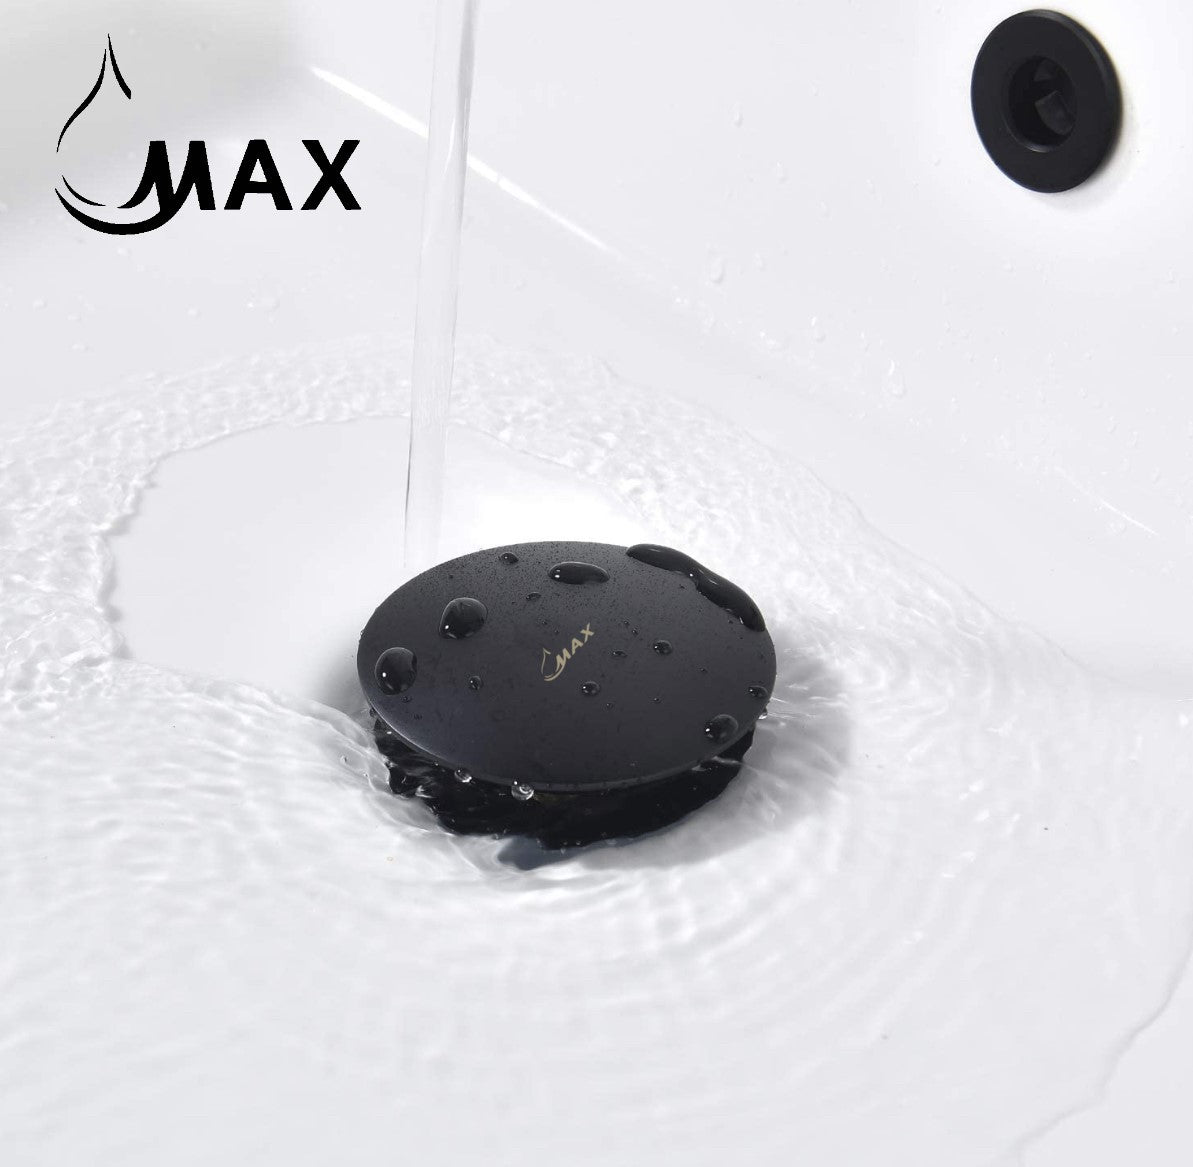 Solid Brass Push Pop Up Sink Drain With Overflow Matte Black Finish